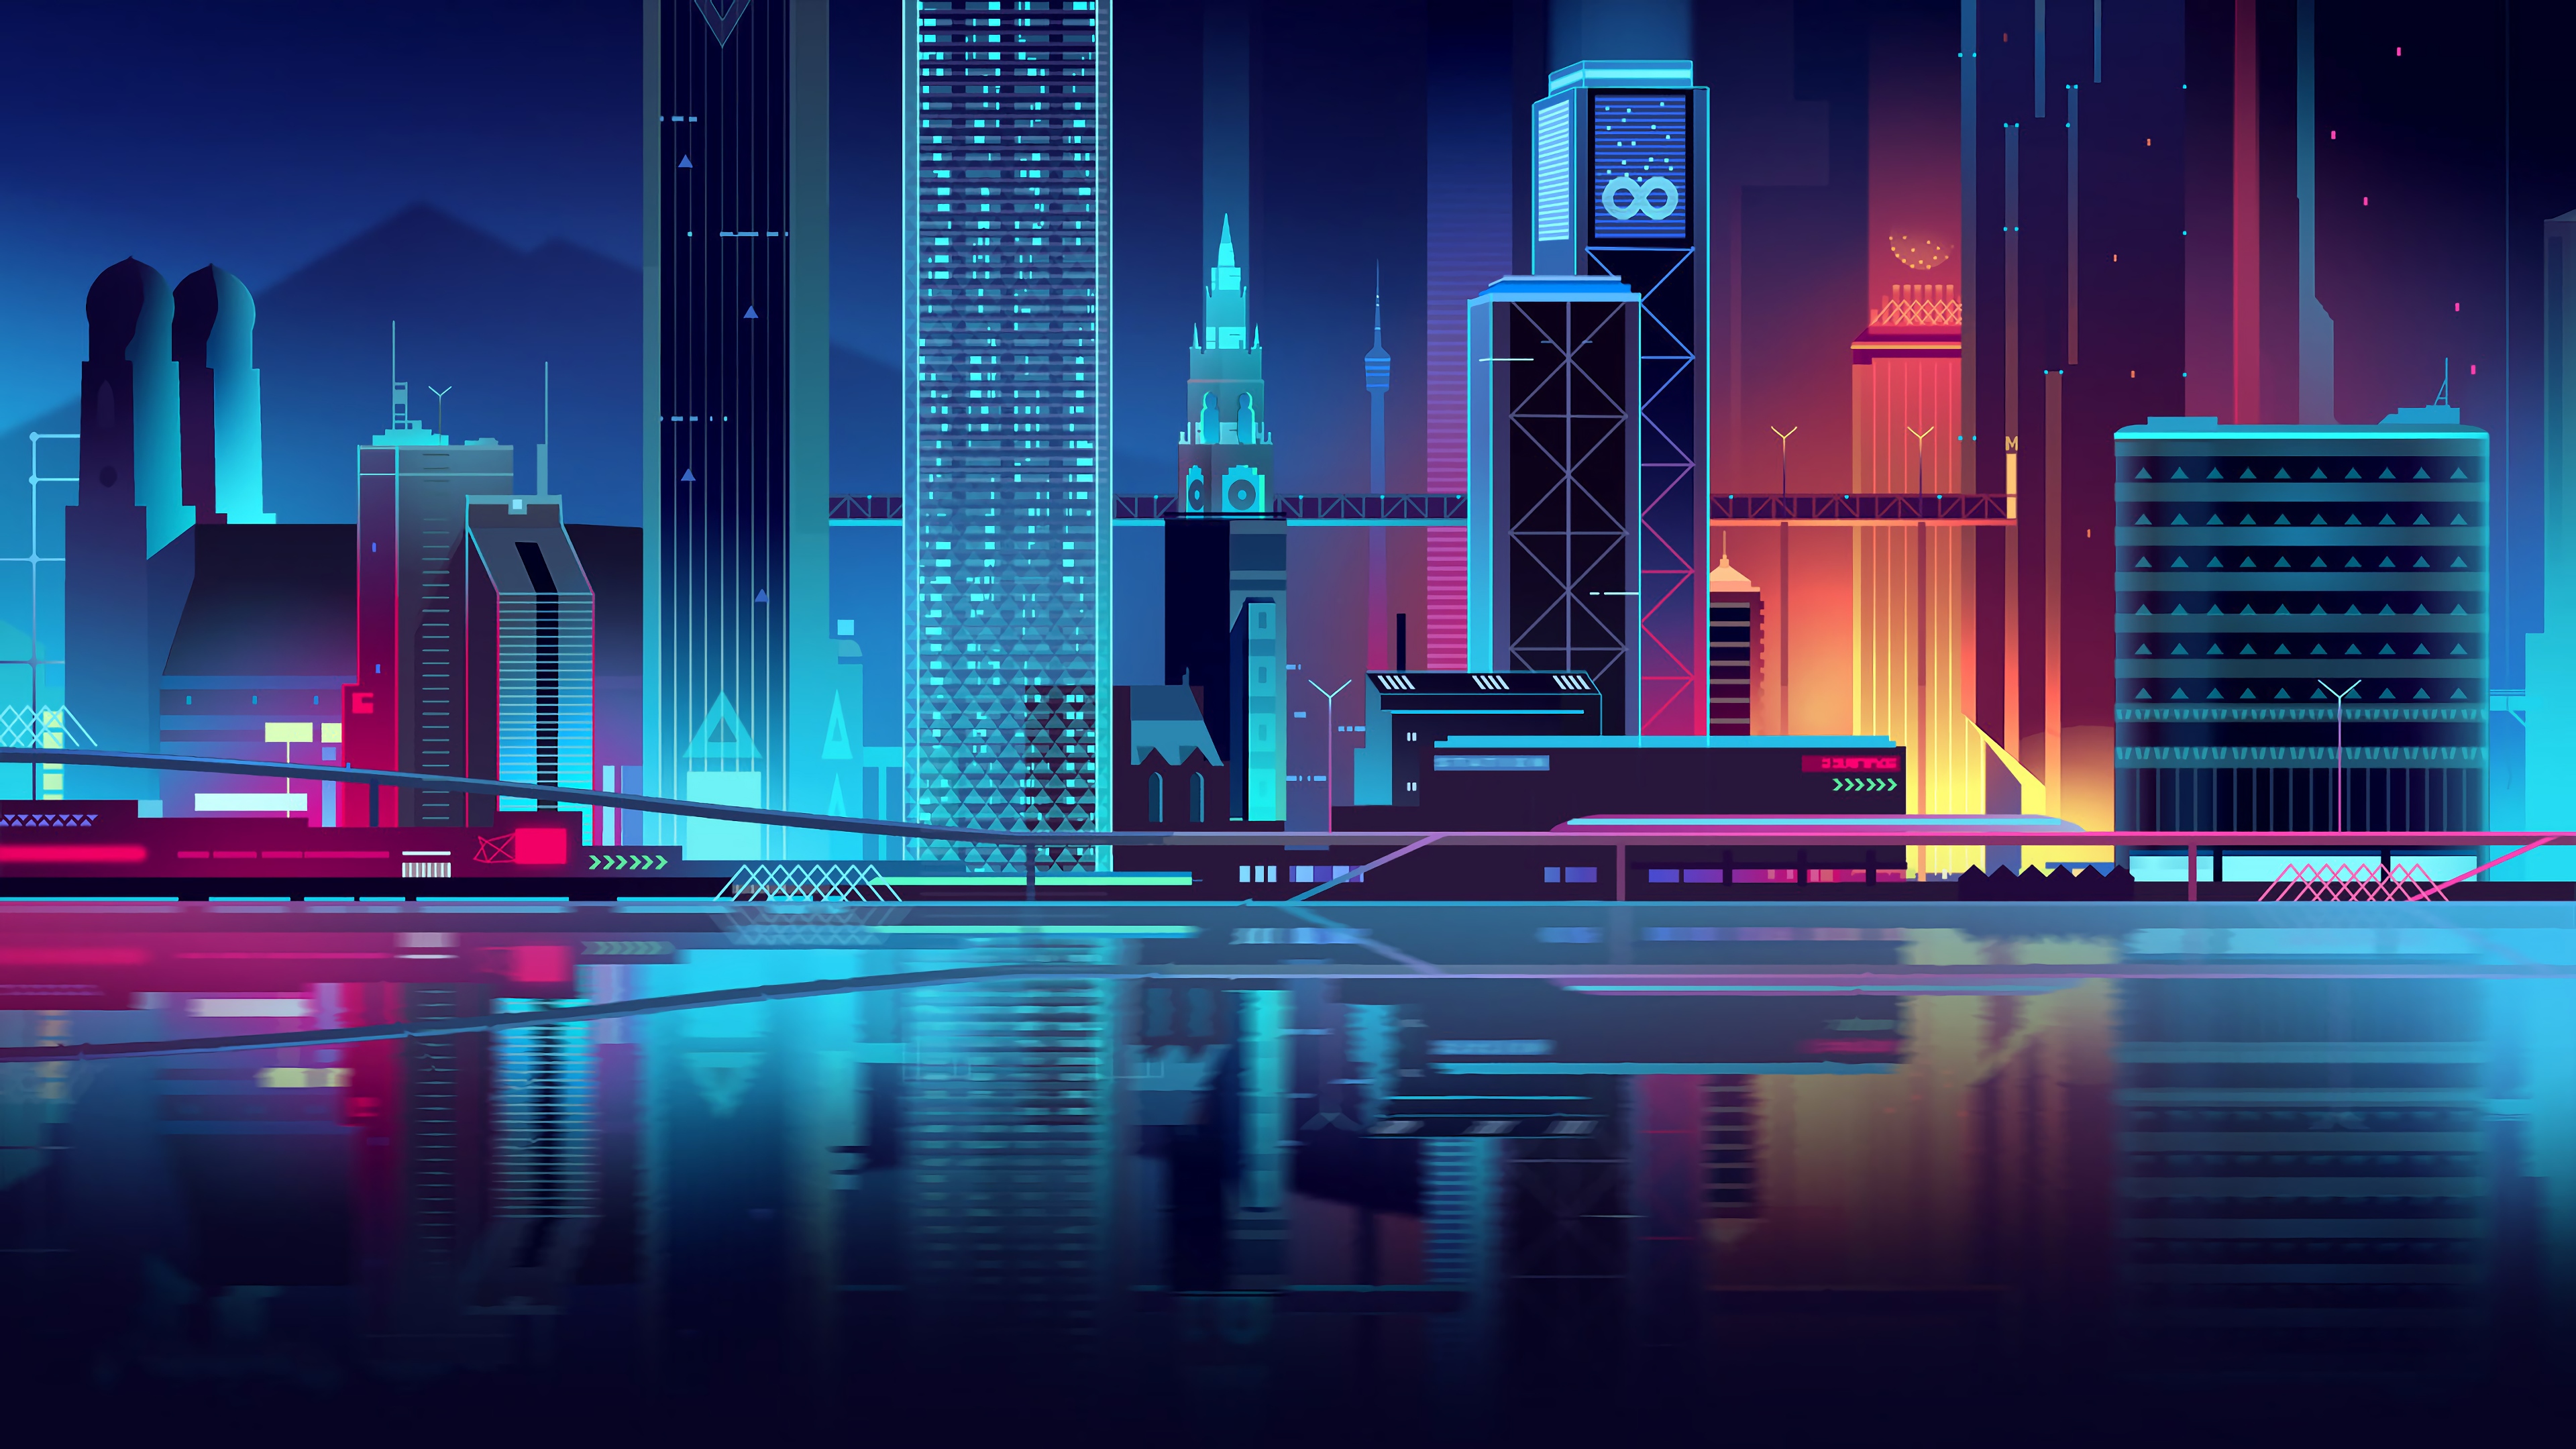 General 3840x2160 digital art artwork illustration vector vector art Romain Trystram city cityscape lights city lights neon building architecture urban modern futuristic cyber cyber city water sea reflection colorful blue cyan red yellow landscape tower skyscraper